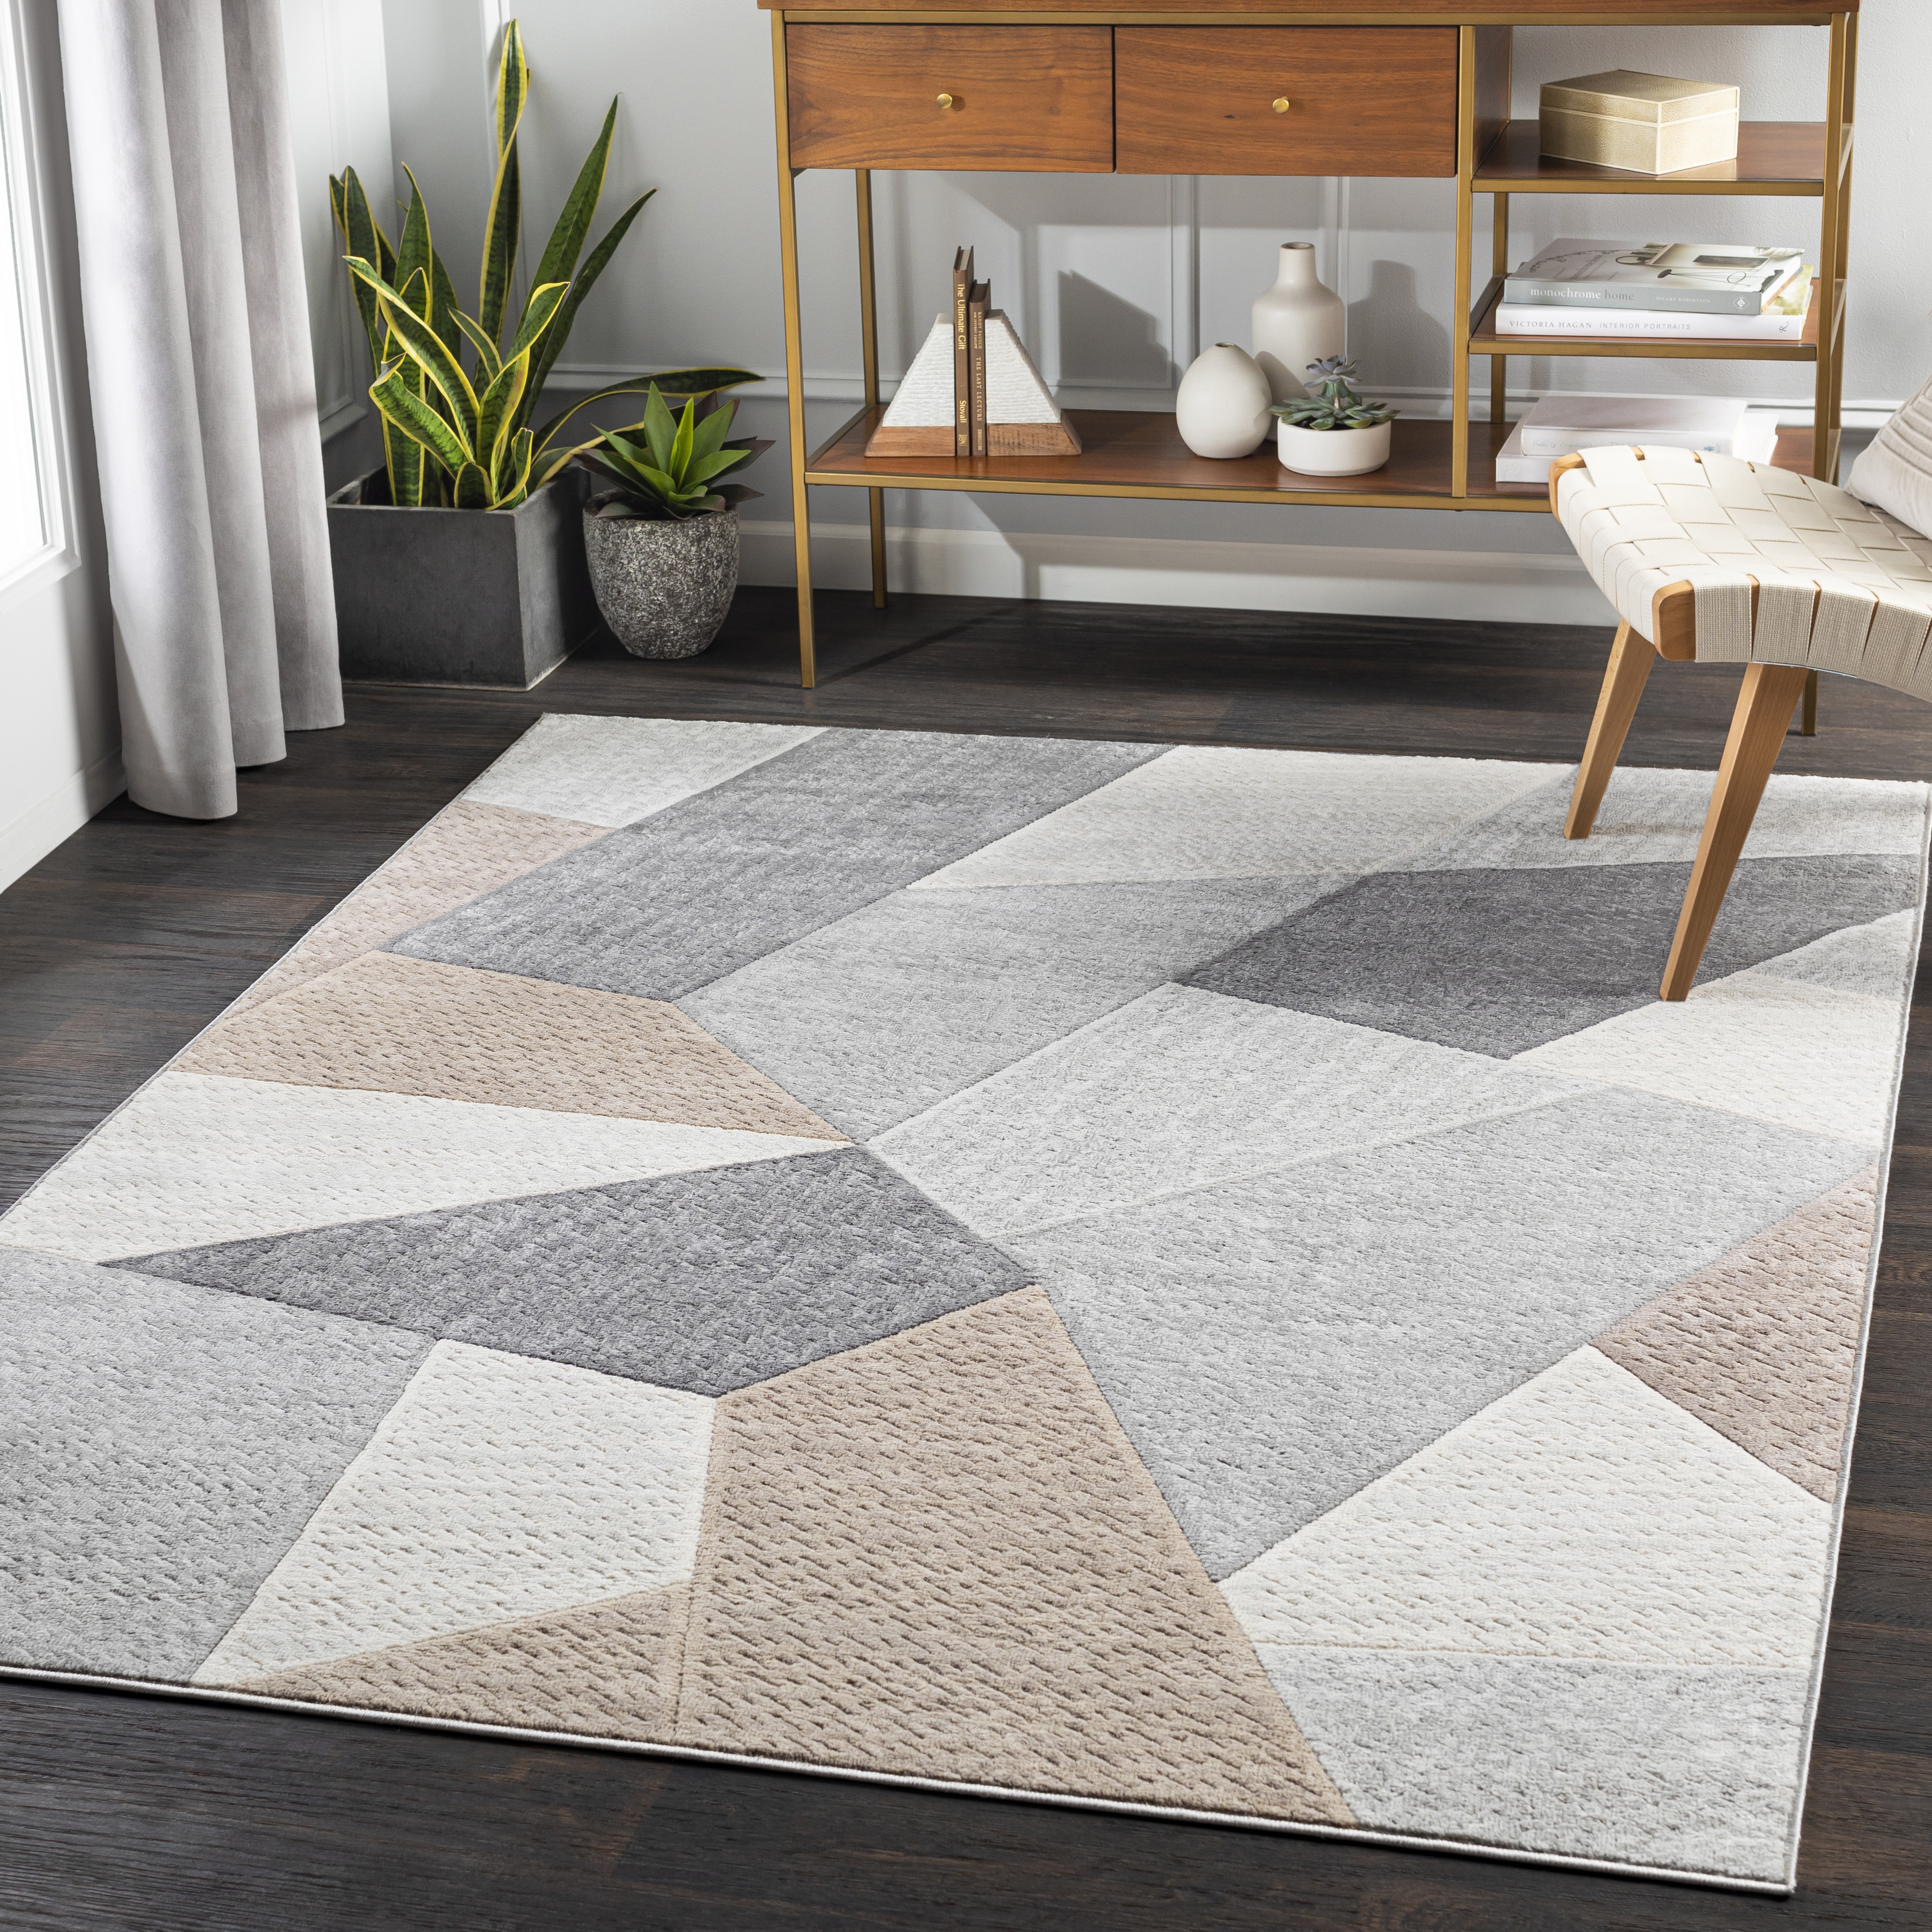 Remy Rug, 5'3" x 7'3" - Image 1